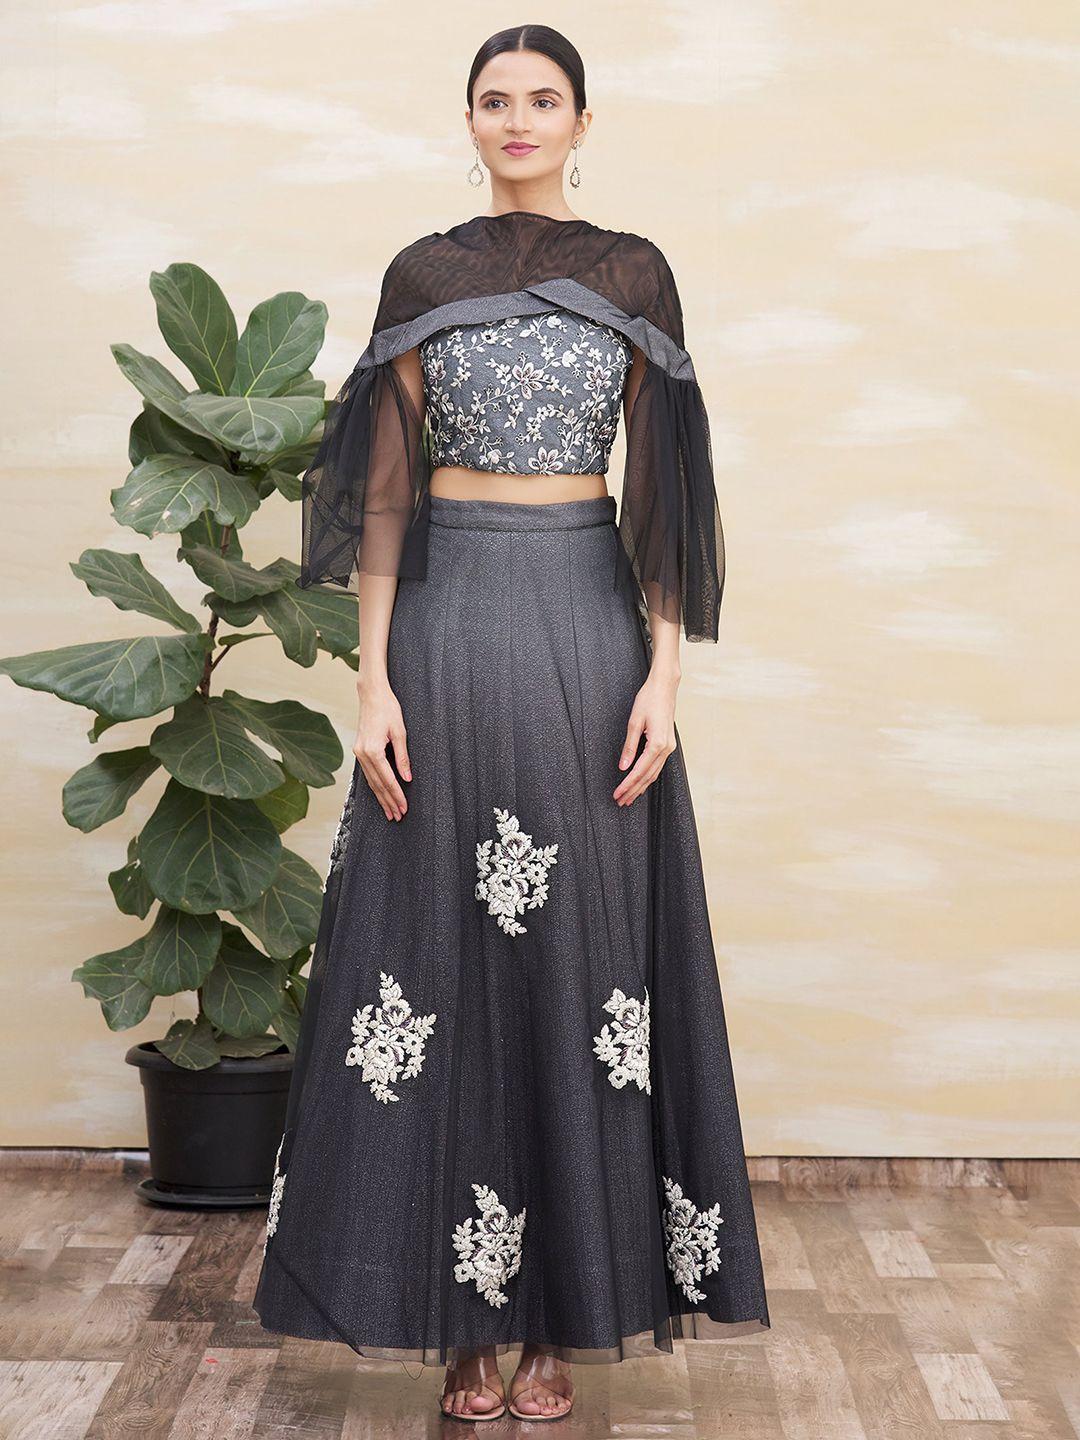 sangria-floral-embroidered-boat-neck-ready-to-wear-lehenga-choli